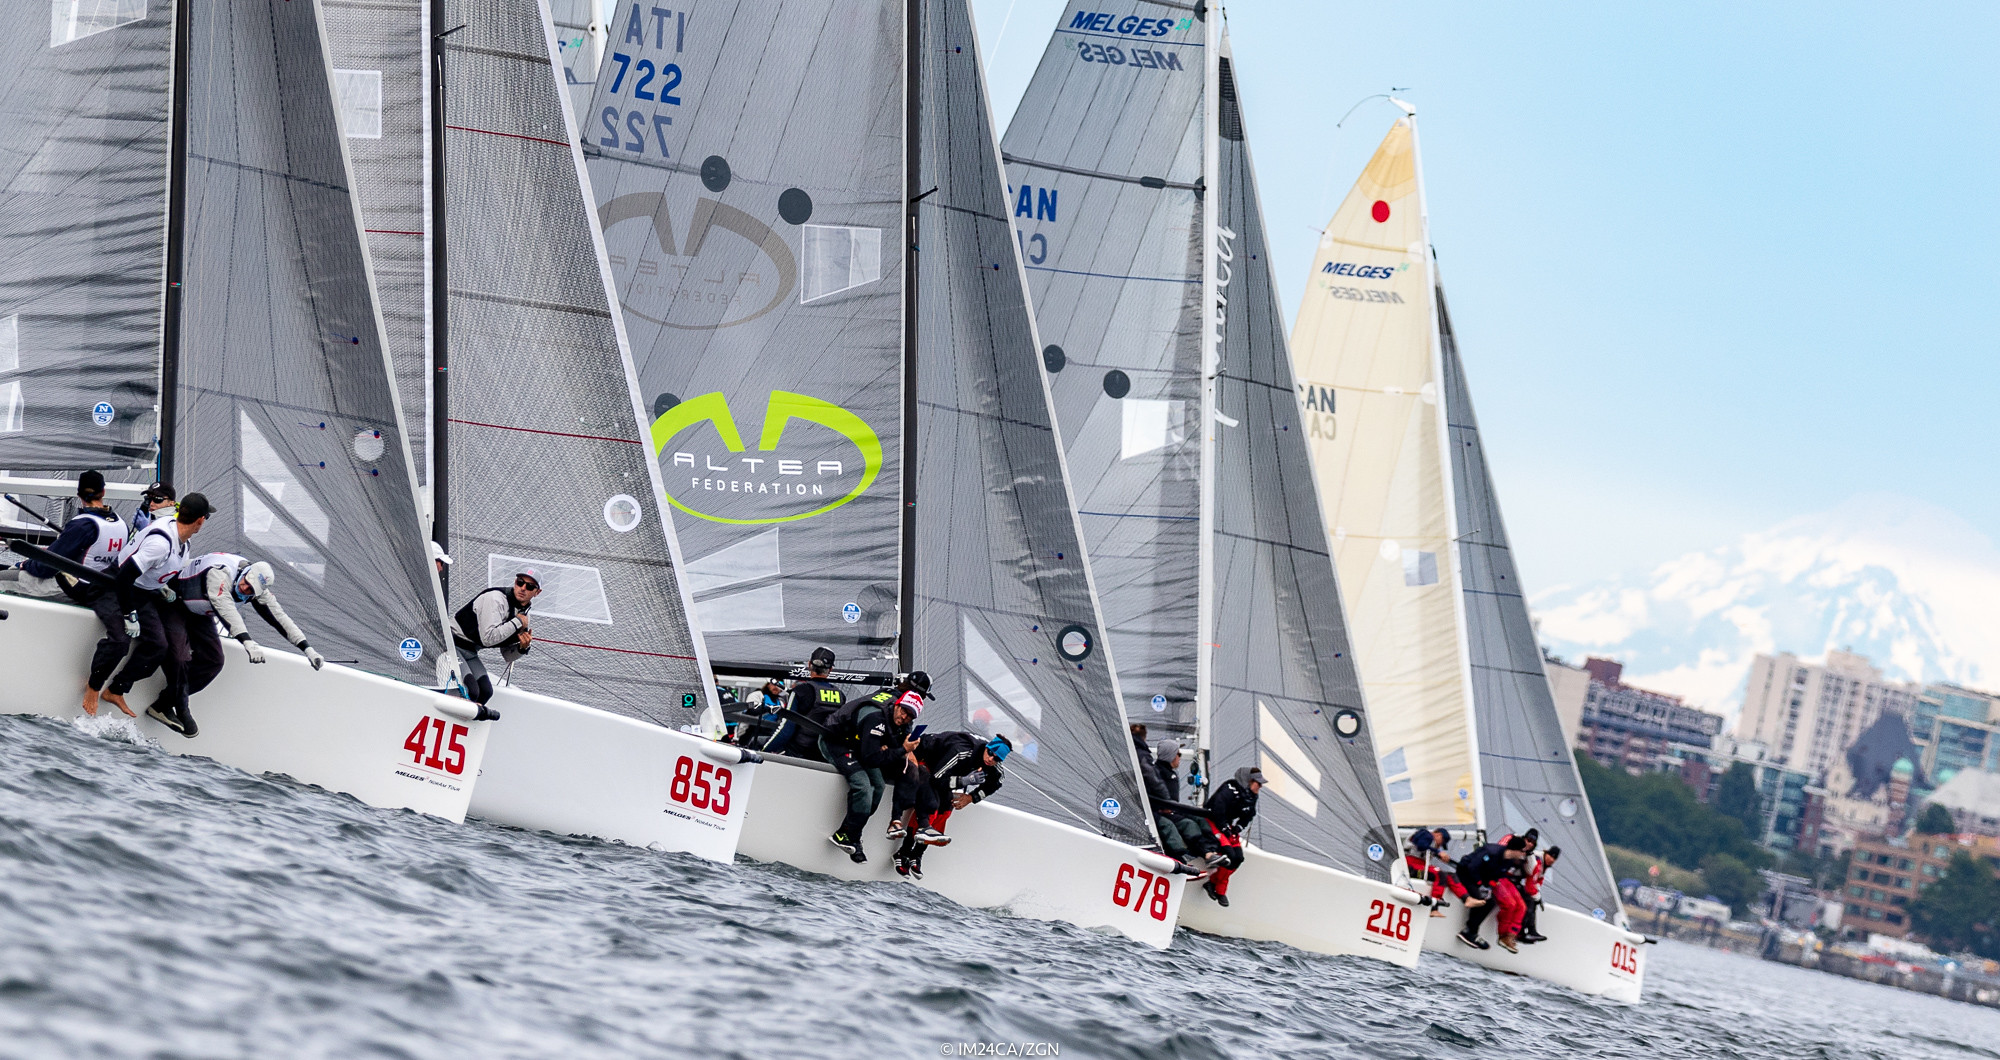 The starting line of the 2020 Melges 24 Worlds in Charleston is getting closer. - Photo © IM24CA / Zerogradinord